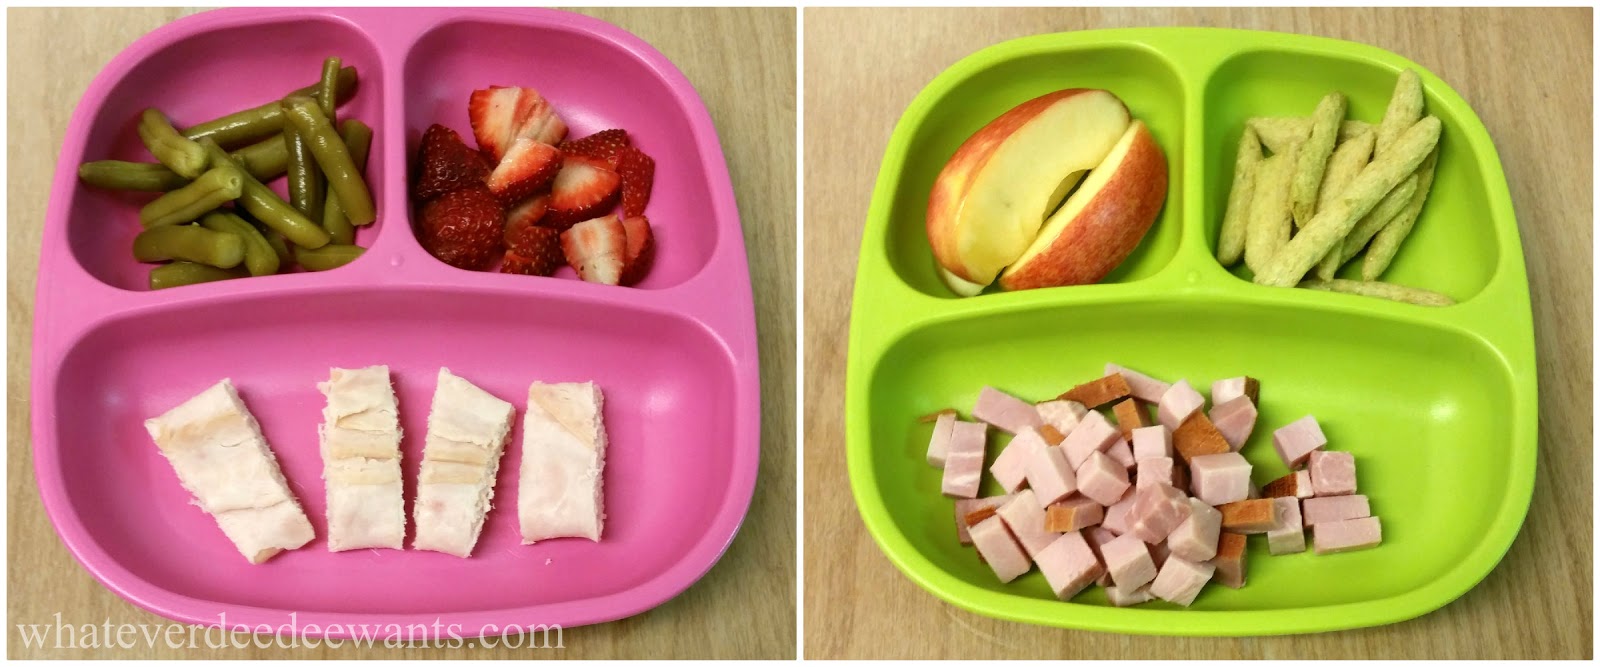 Whatever Dee-Dee wants, she's gonna get it: Easy Toddler Meals With Re ...